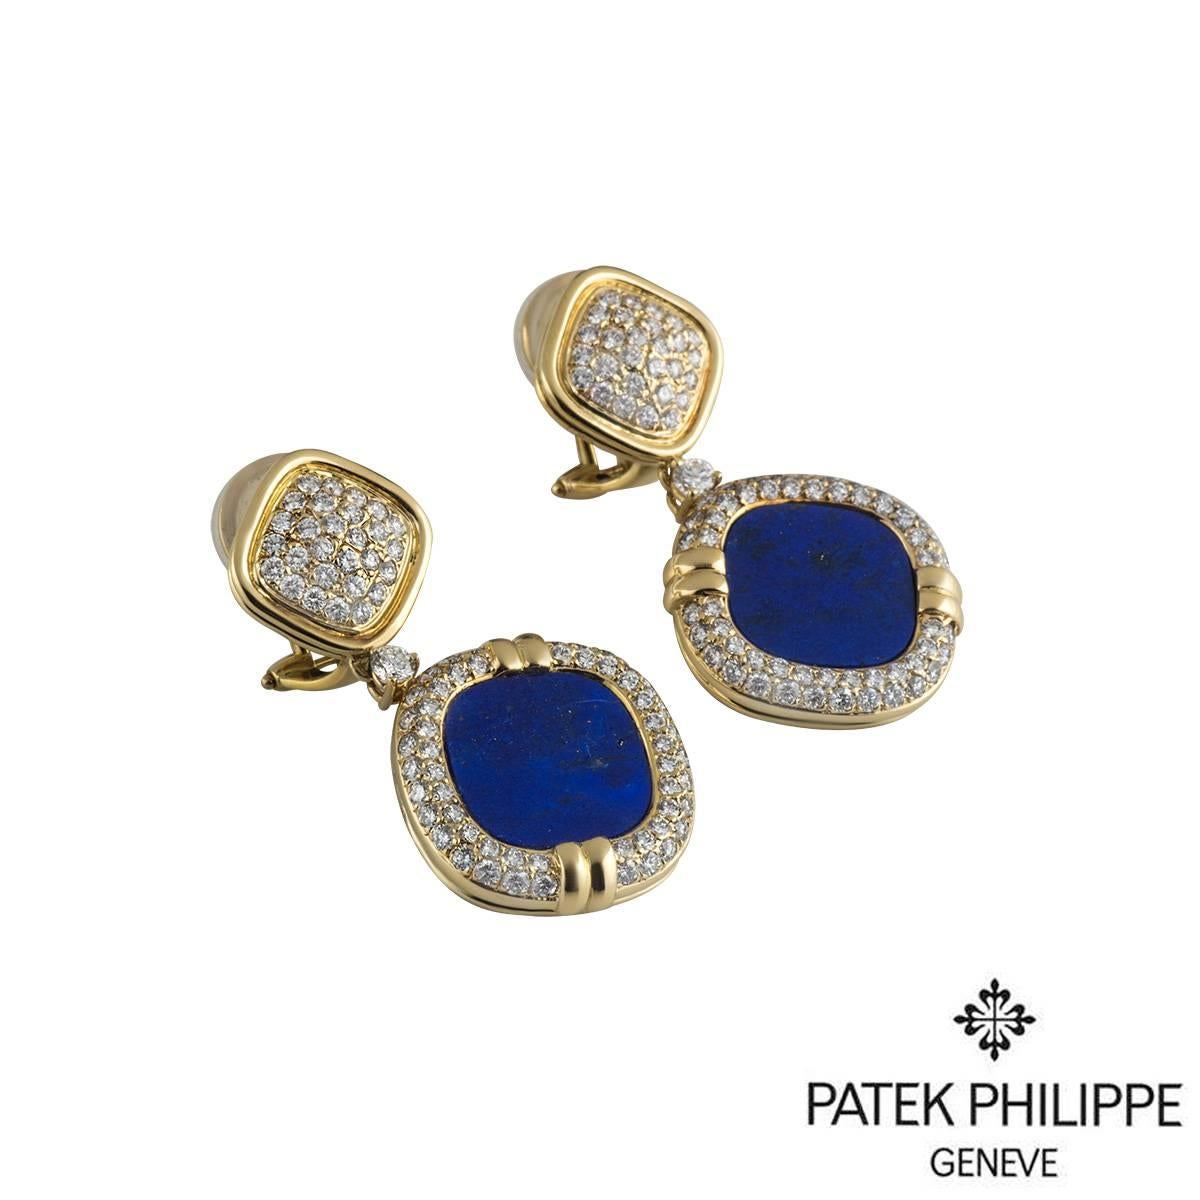 A stunning pair of rare 18k yellow gold Patek Philippe earrings. Each earring is composed of a pave round brilliant cut diamond set rhombus motif, suspending a single round brilliant cut diamond and a larger motif featuring a lapis lazuli stone with